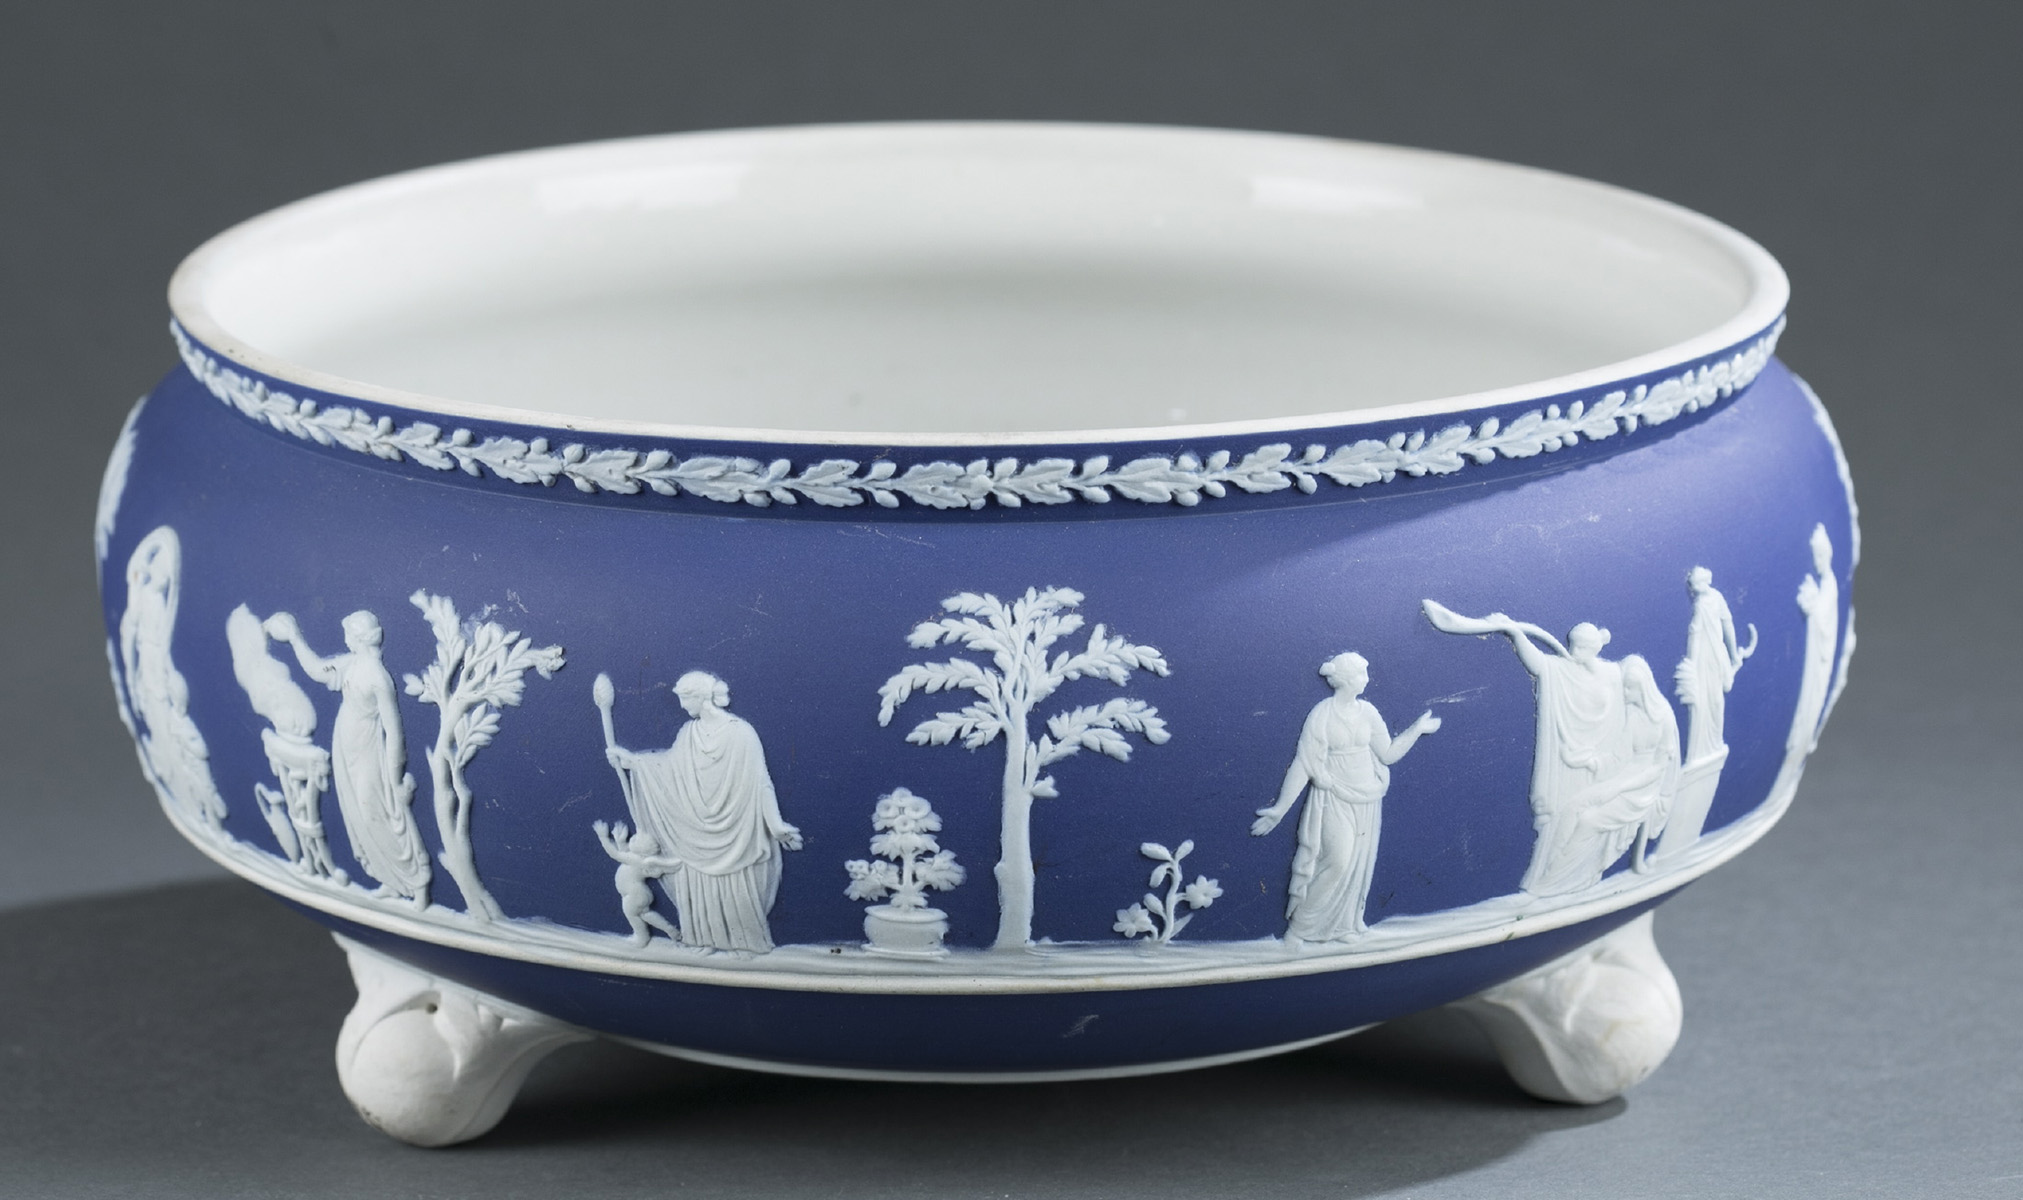 Quinn&#8217;s presents definitive Wedgwood ceramics collection in April 14 auction